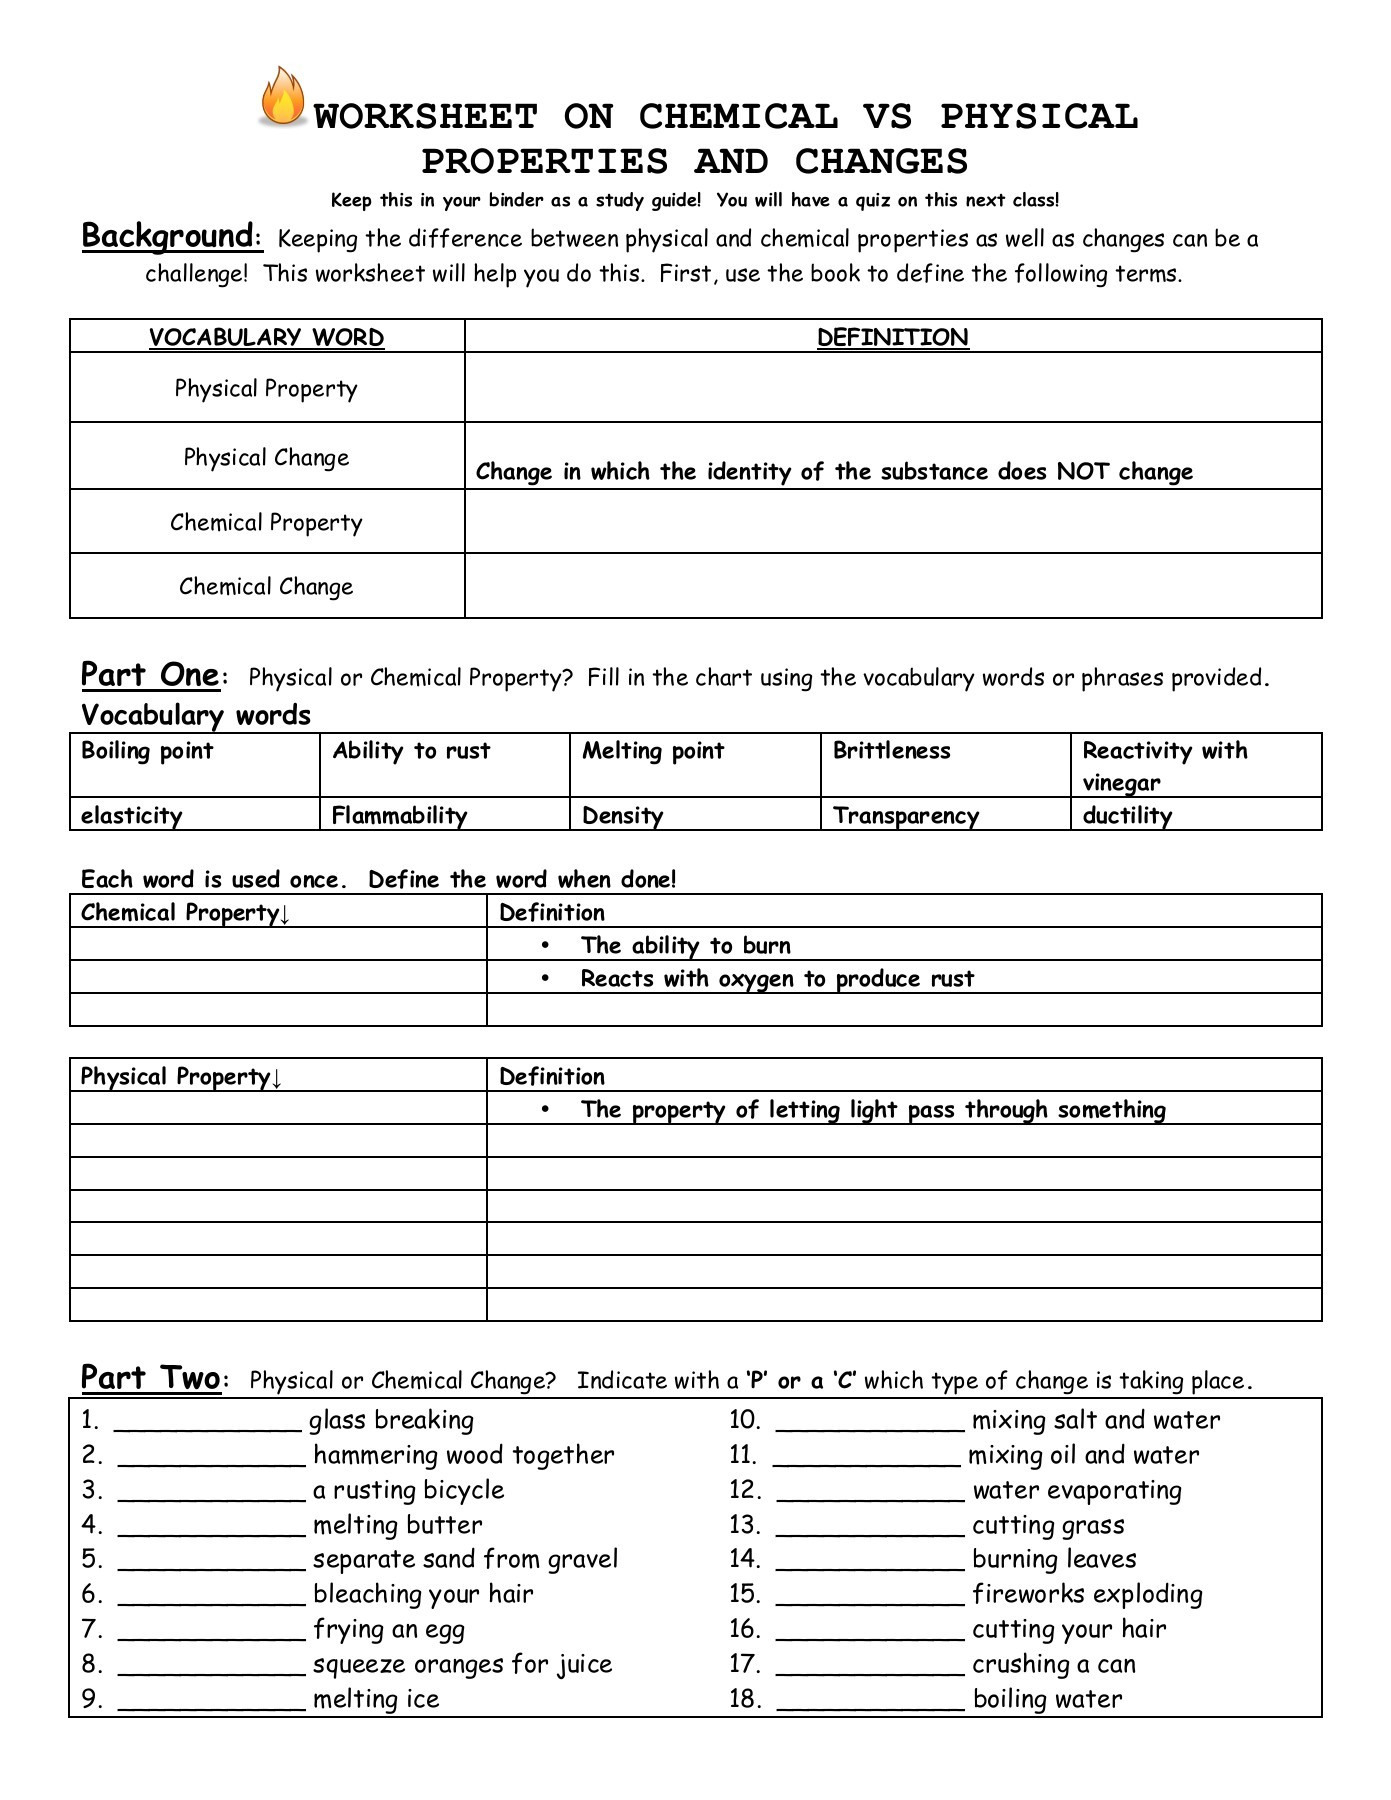 Worksheets Worksheet On Chemical Vs Physical Properties And Changes